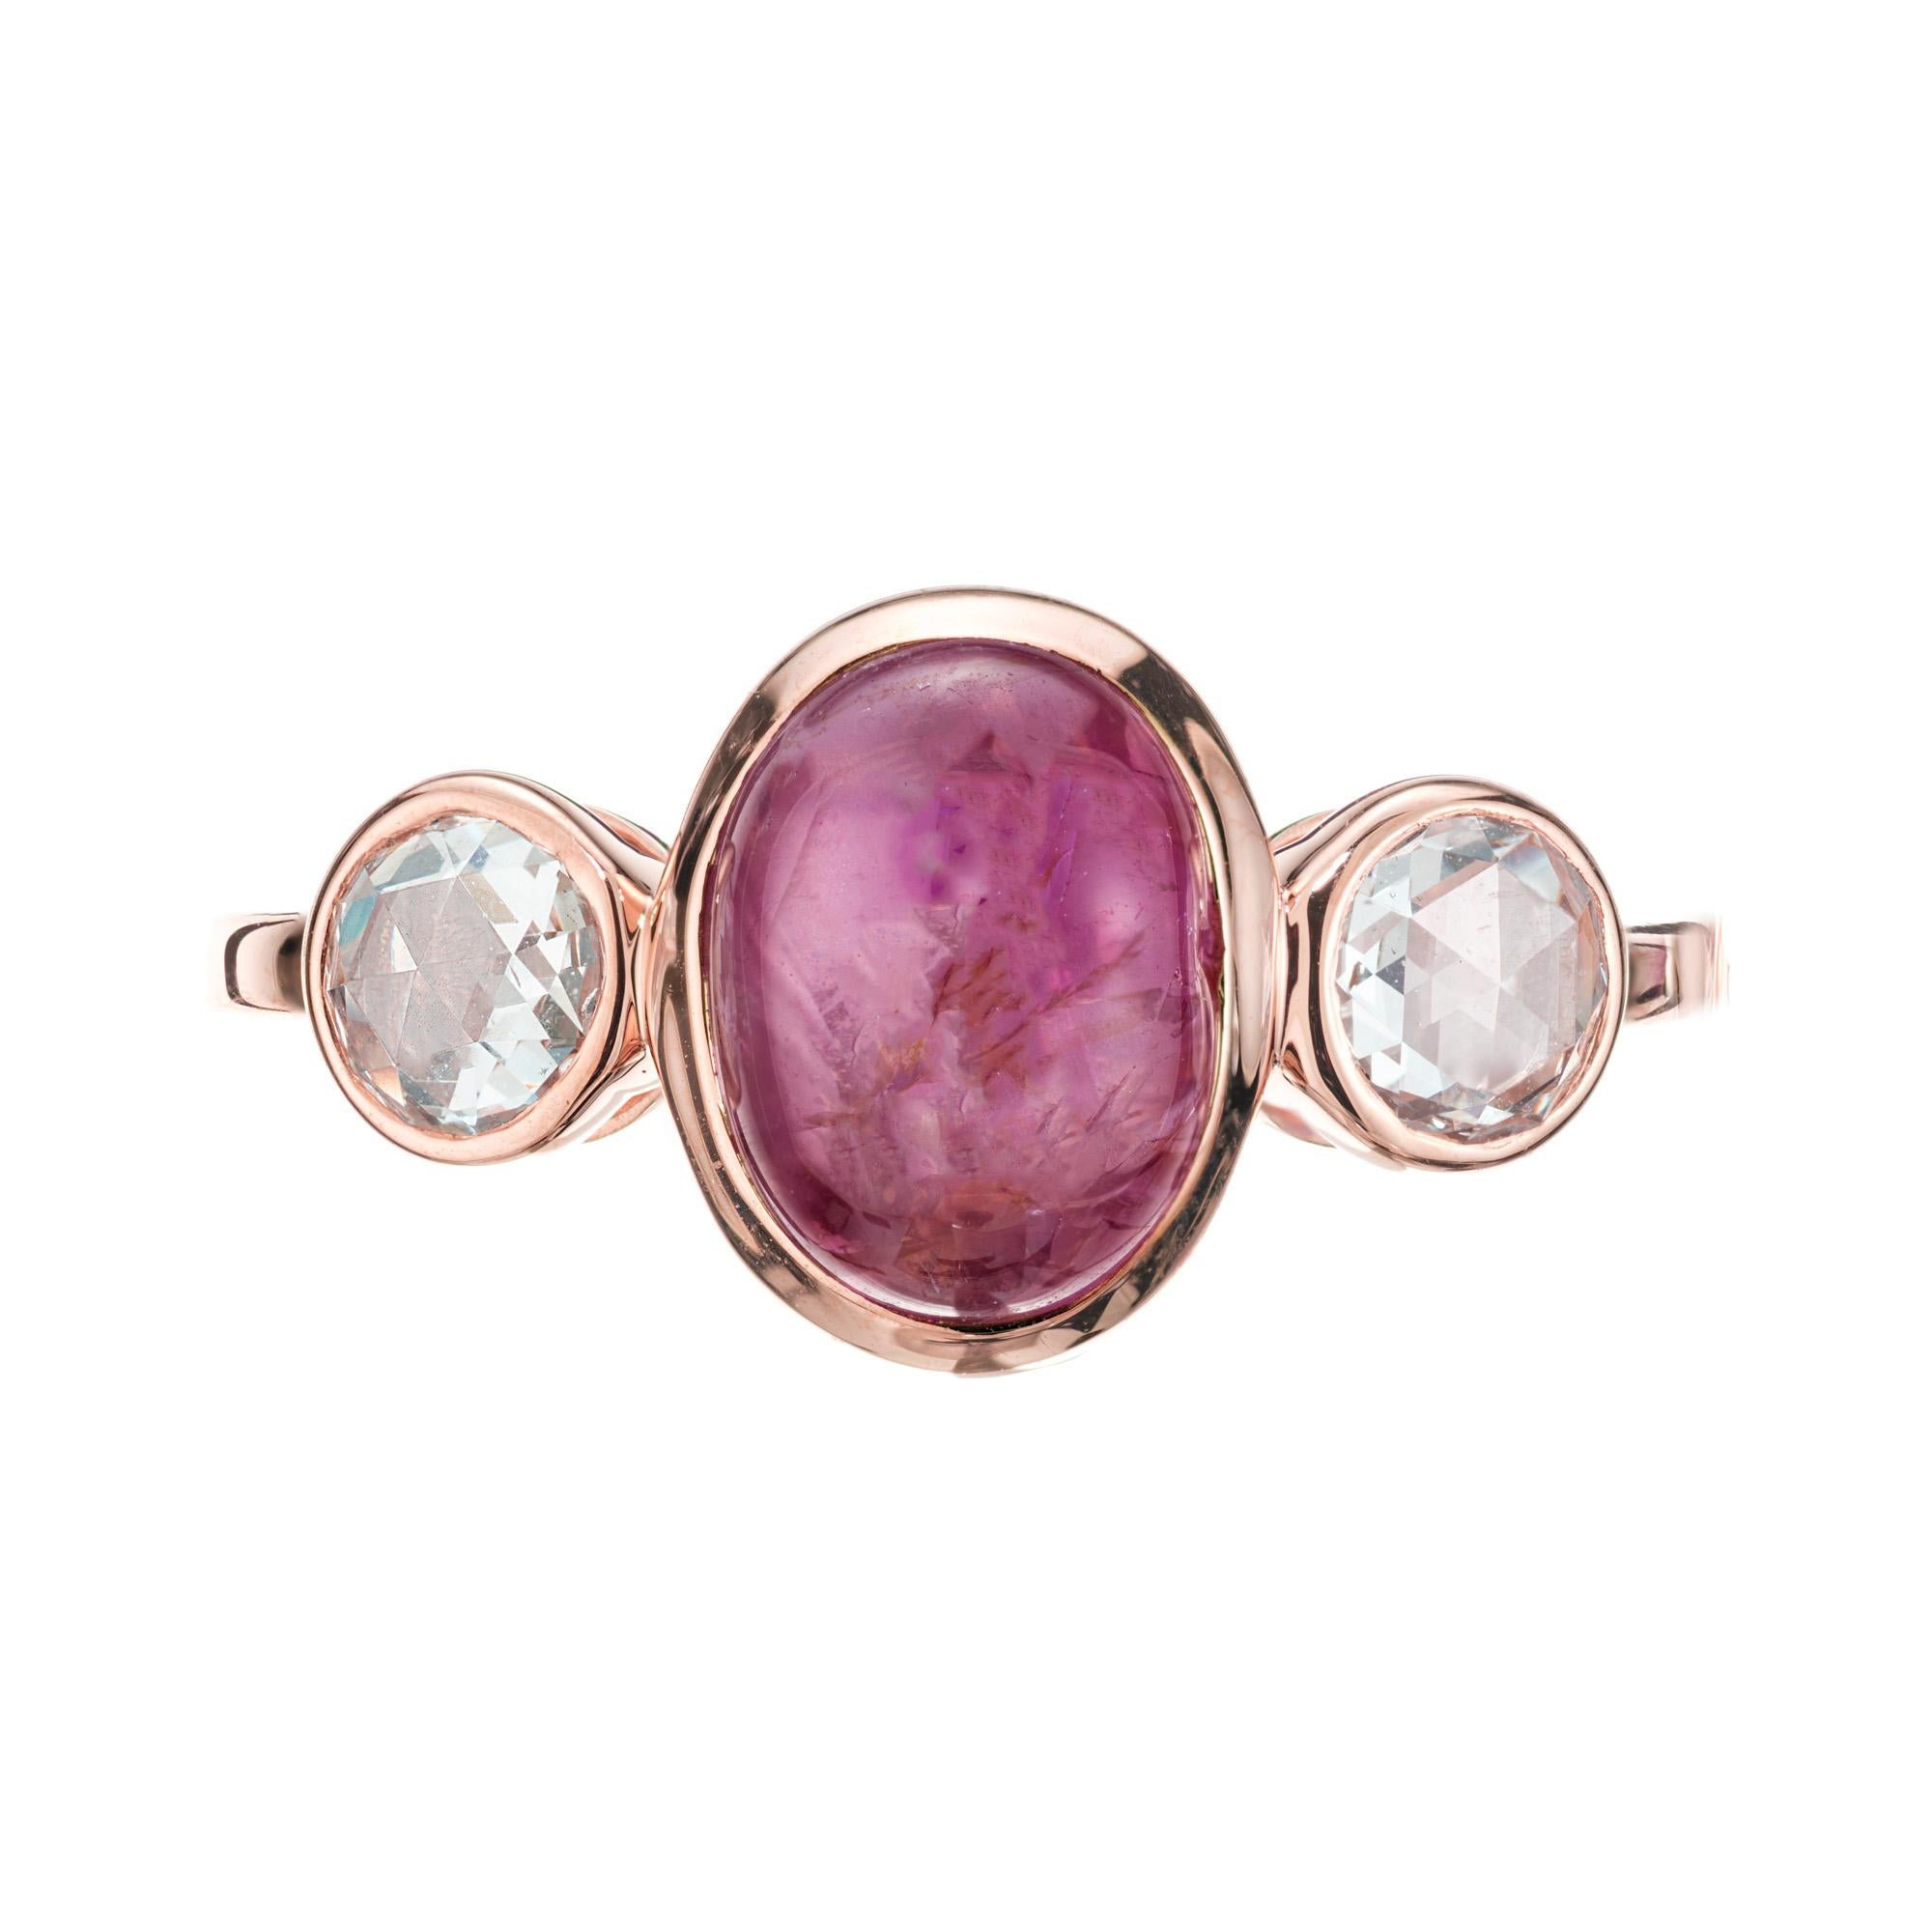 Star sapphire and diamond three-stone engagement ring. GIA certified oval cabochon center star sapphire set in a 18k rose gold setting with two rose cut bezel set side diamonds. The star is light but visible in certain light. Photos in gallery. This